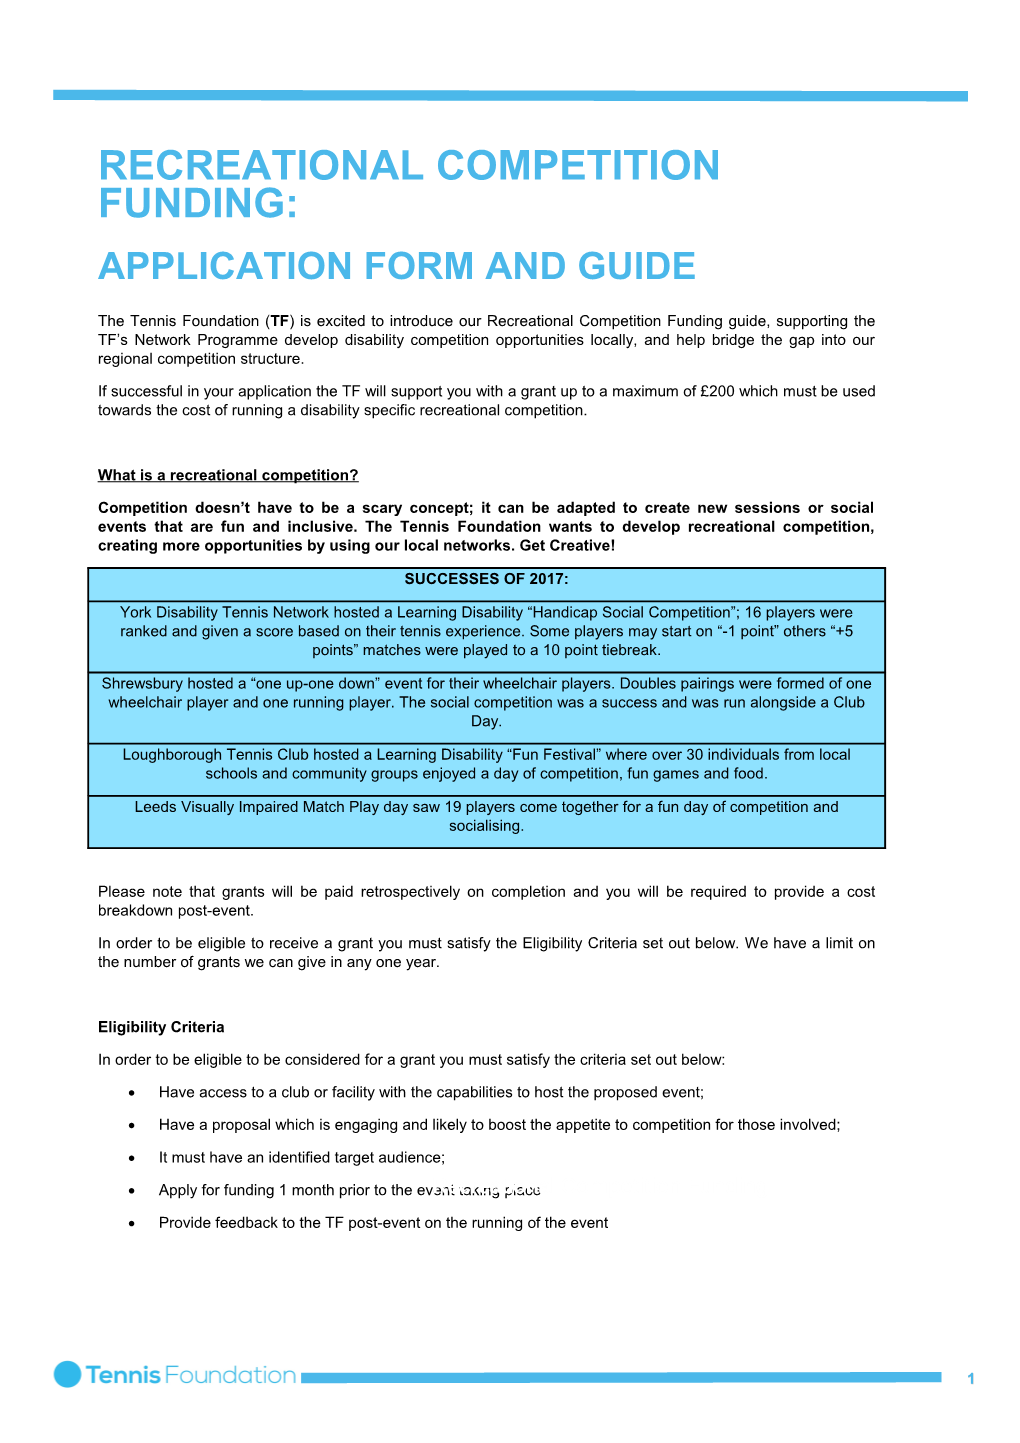 Application Form and Guide